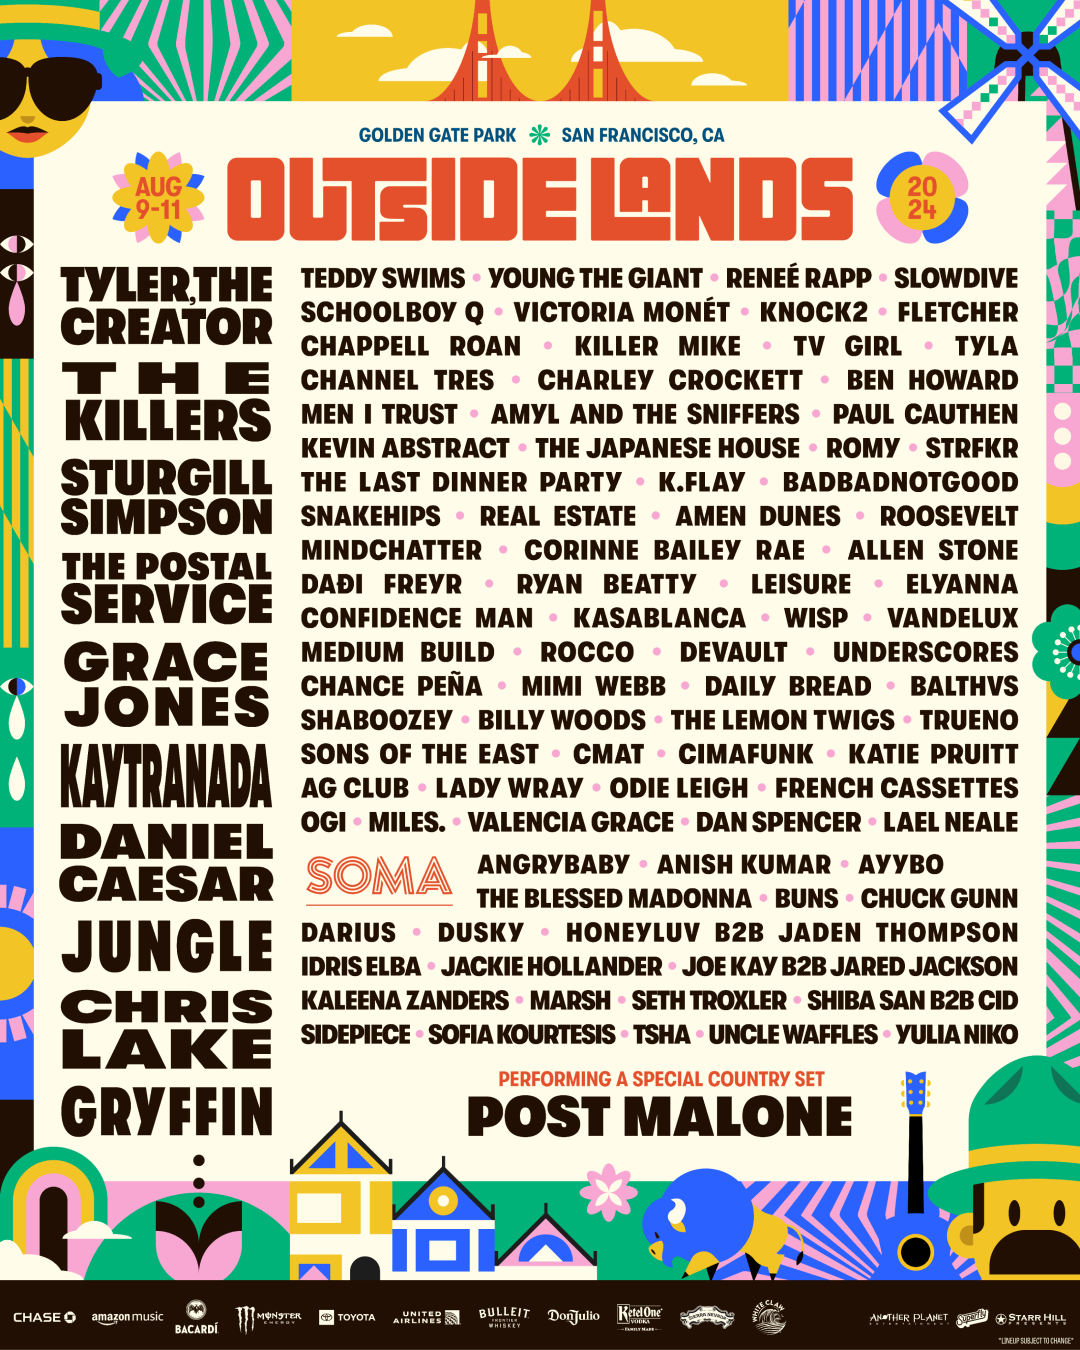 Outside Lands 2024 Lineup: Tyler The Creator, The Killers, Sturgill Simpson, The Postal Service, Grace Jones, Kaytranada, Jungle, Chris Lake, Griffin, Post Malone, and more